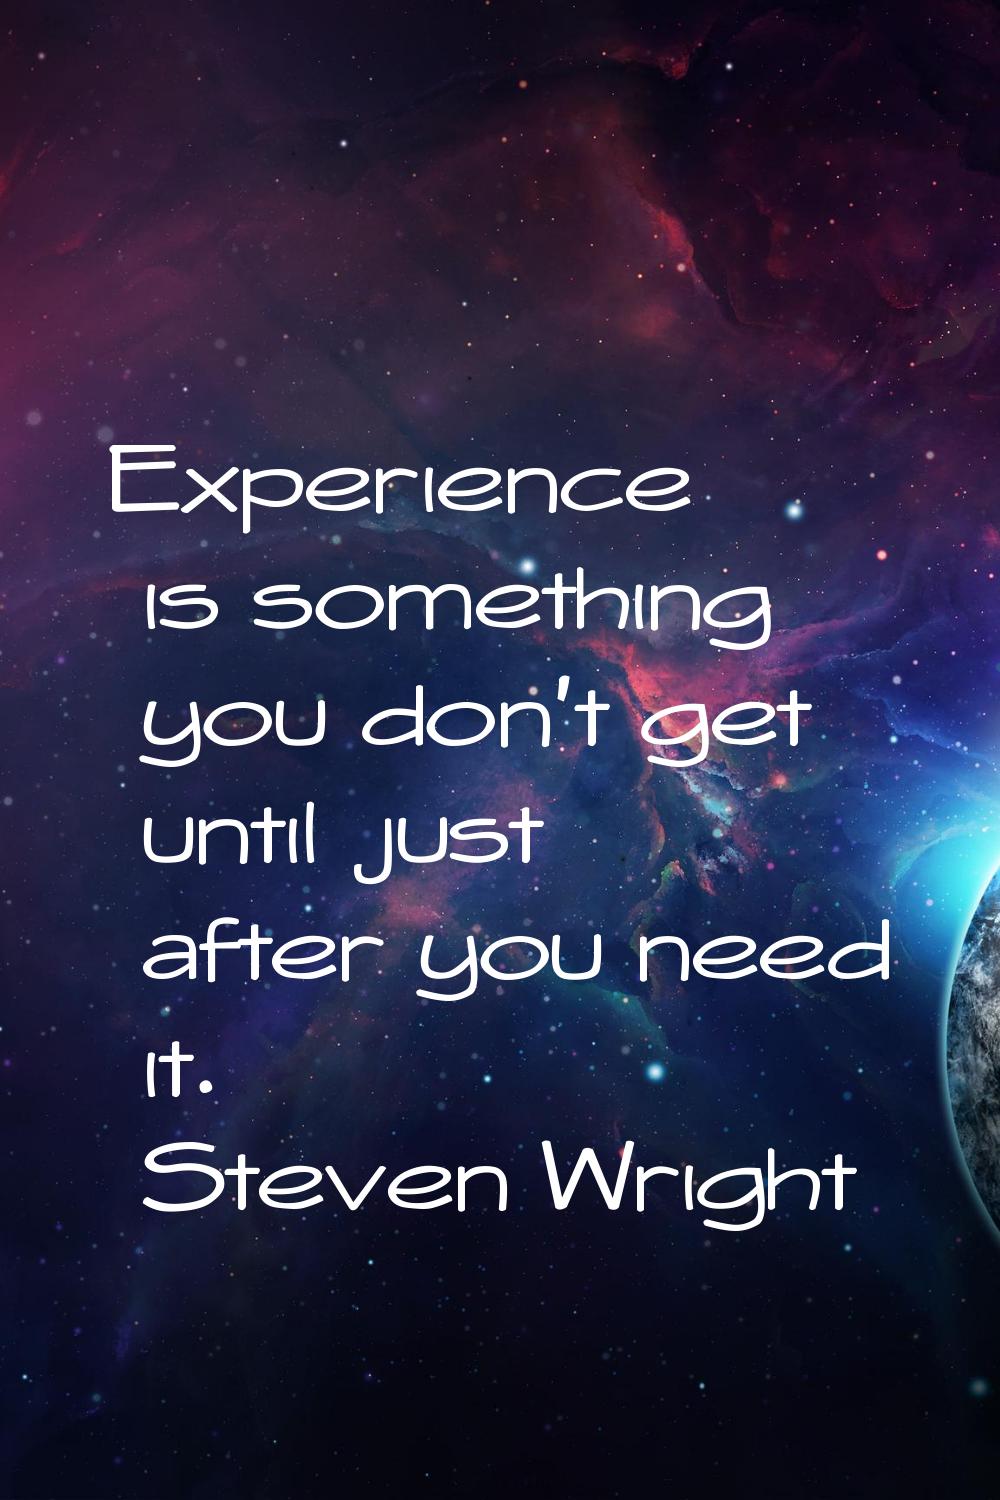 Experience is something you don't get until just after you need it.